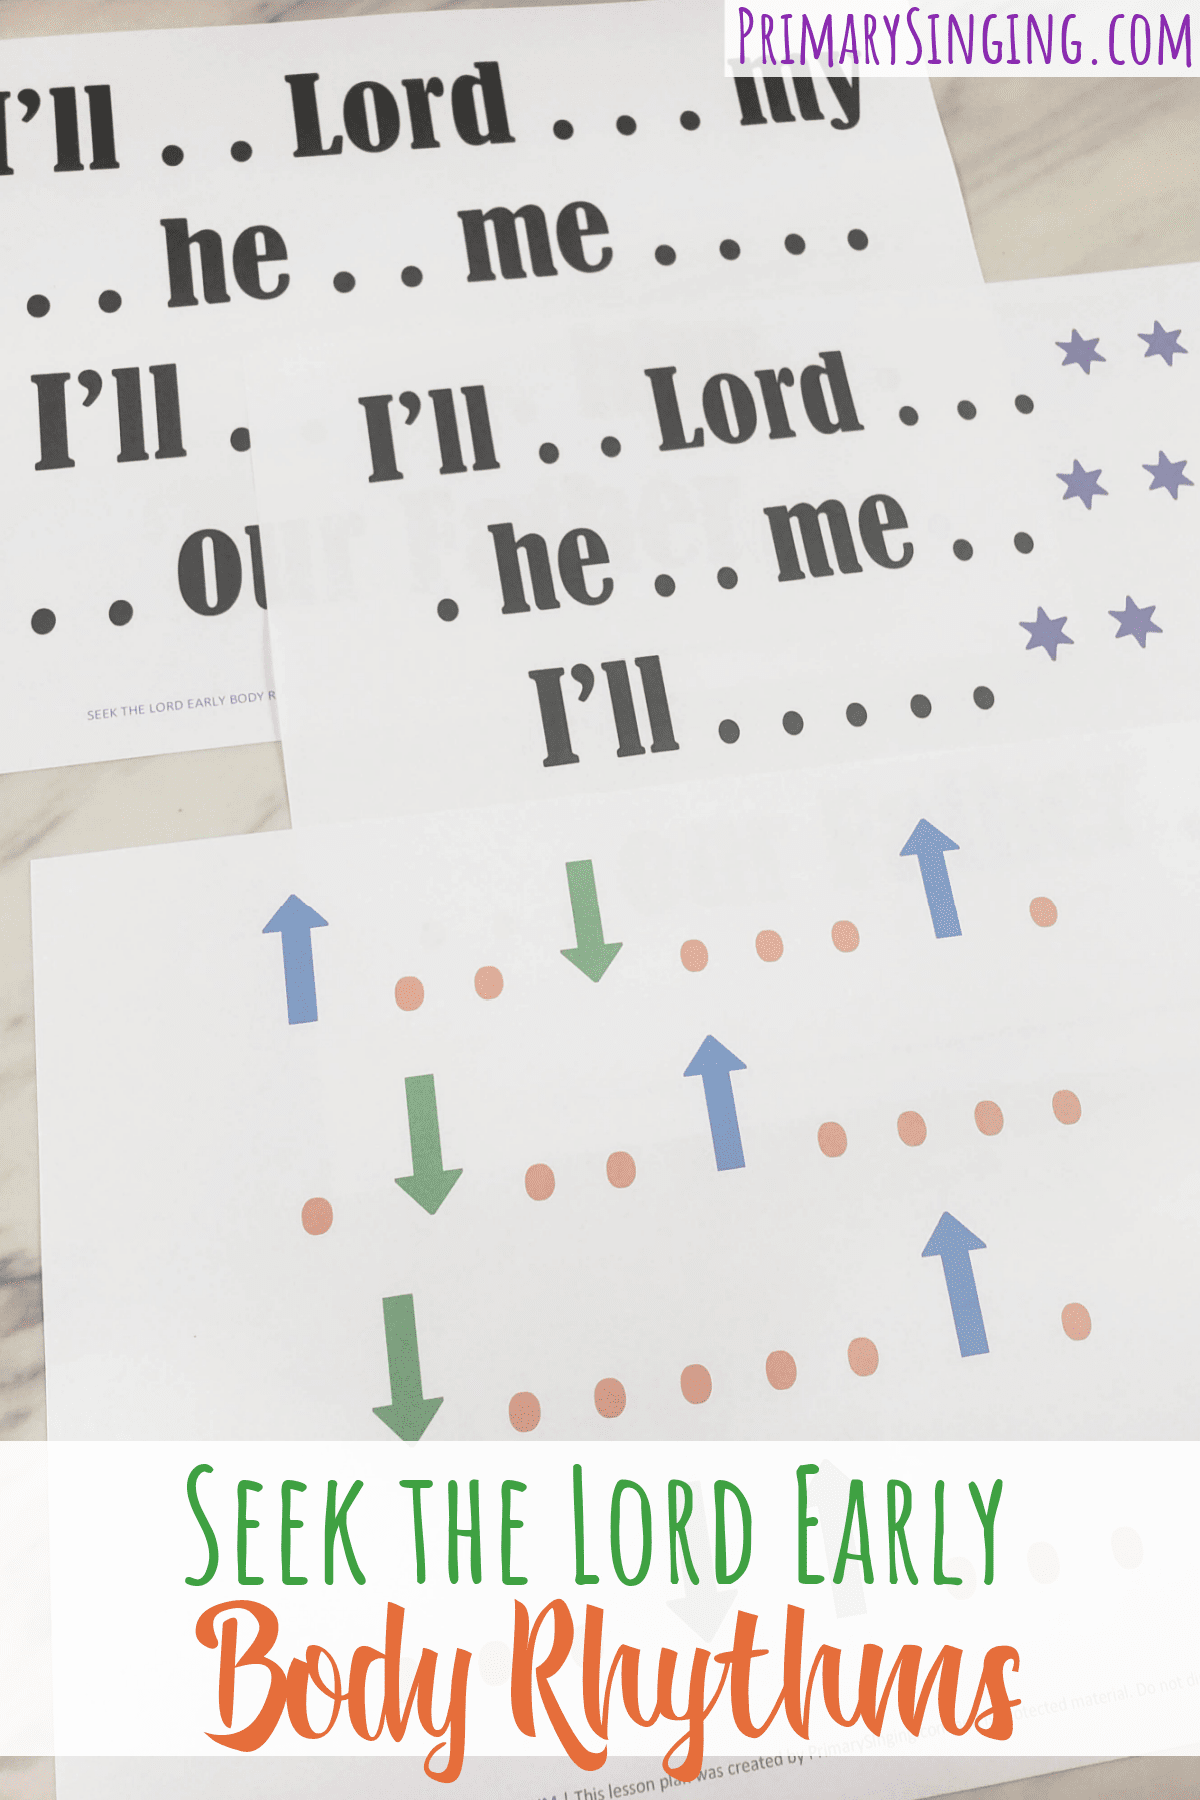 Seek the Lord Early body rhythm fun and easy singing time ideas for LDS Primary music leaders. 